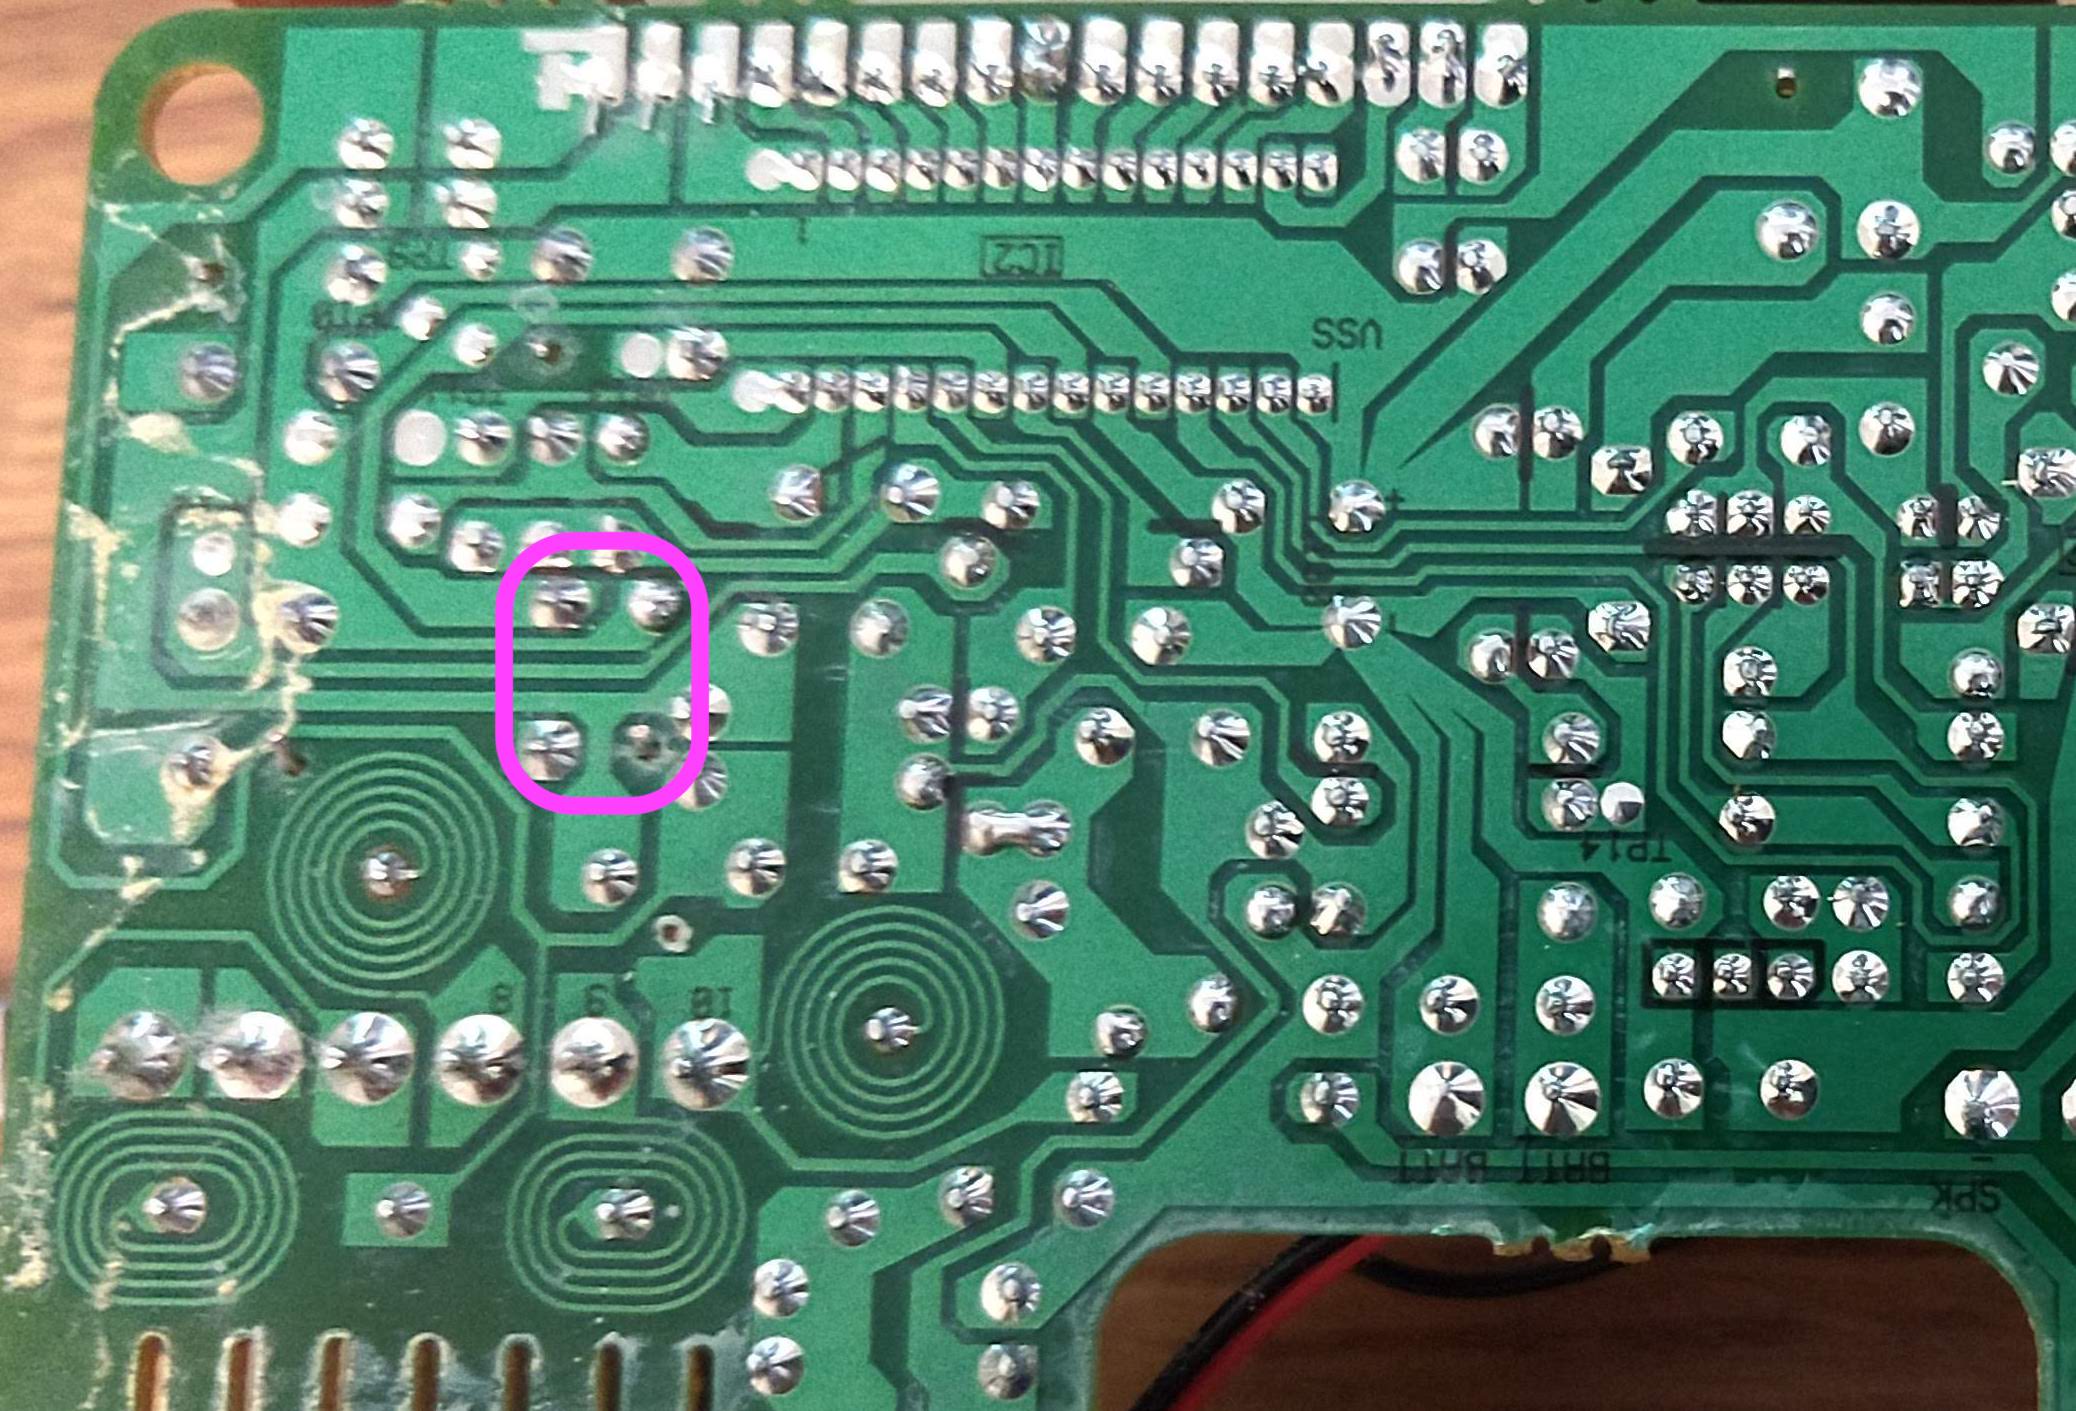 Close-up of the underside of the circuit board